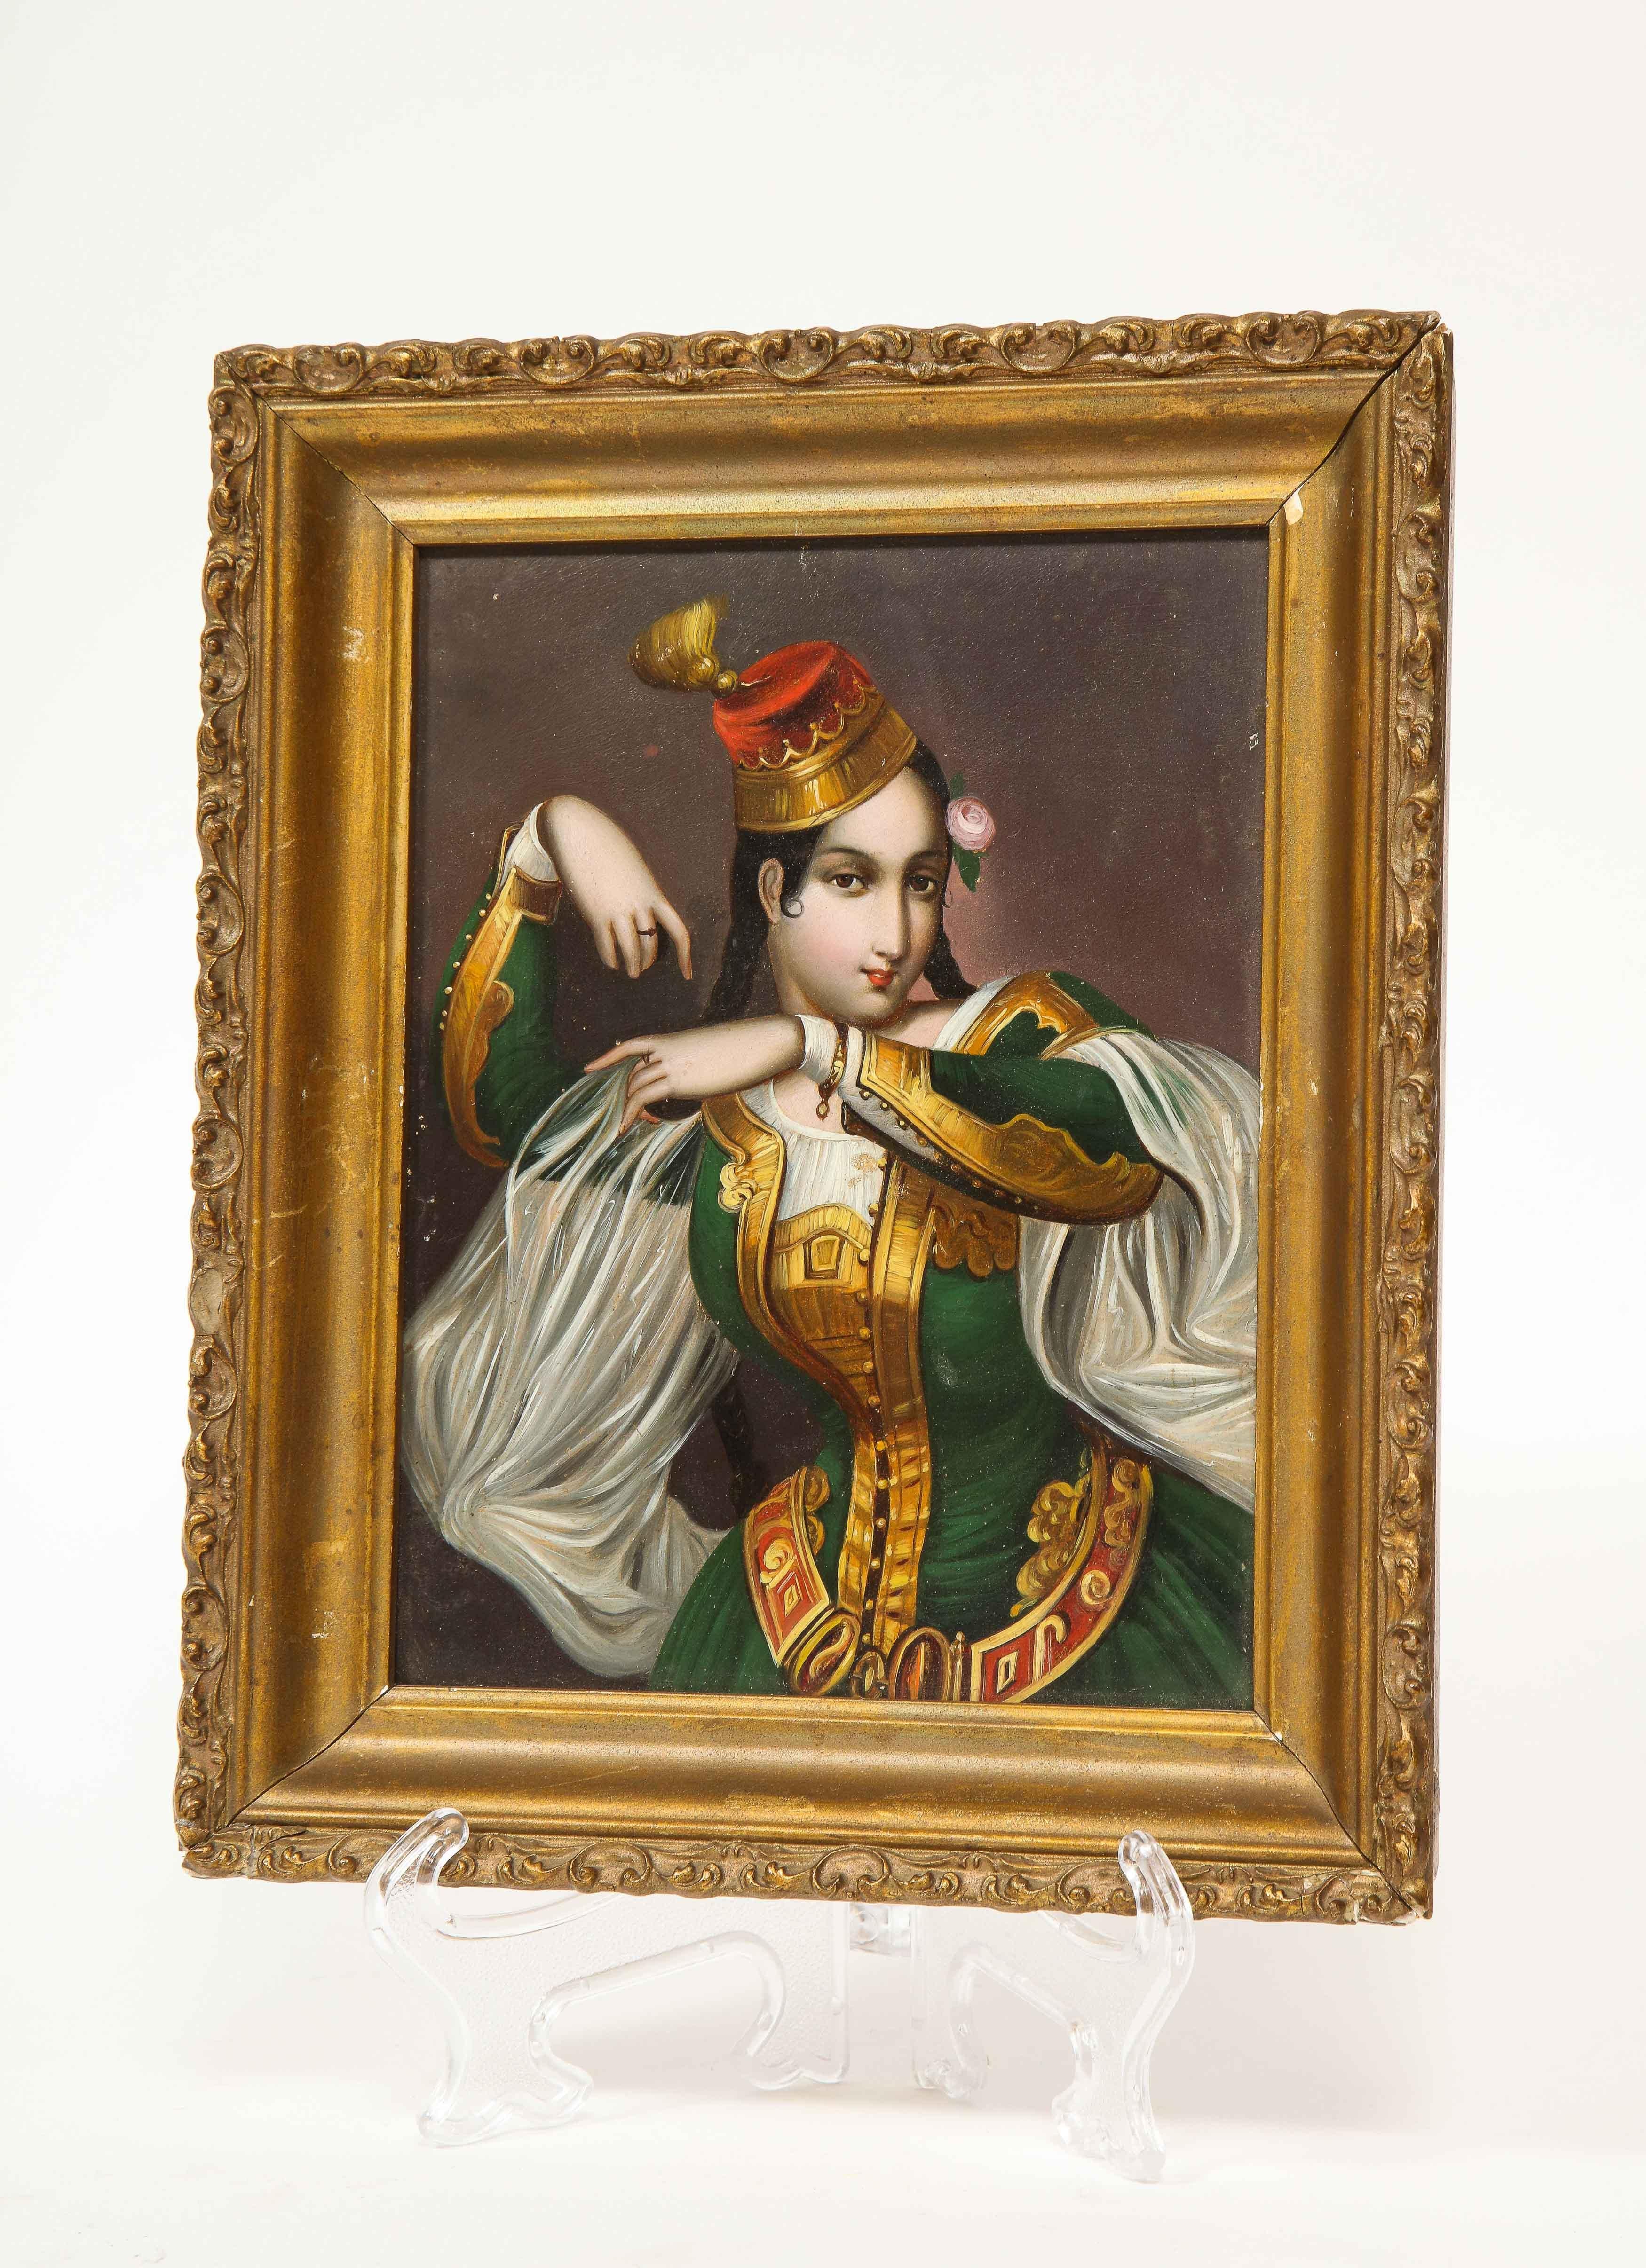 Giltwood Exceptional Quality Miniature Painting of an Orientalist Turkish Dancer, 1860